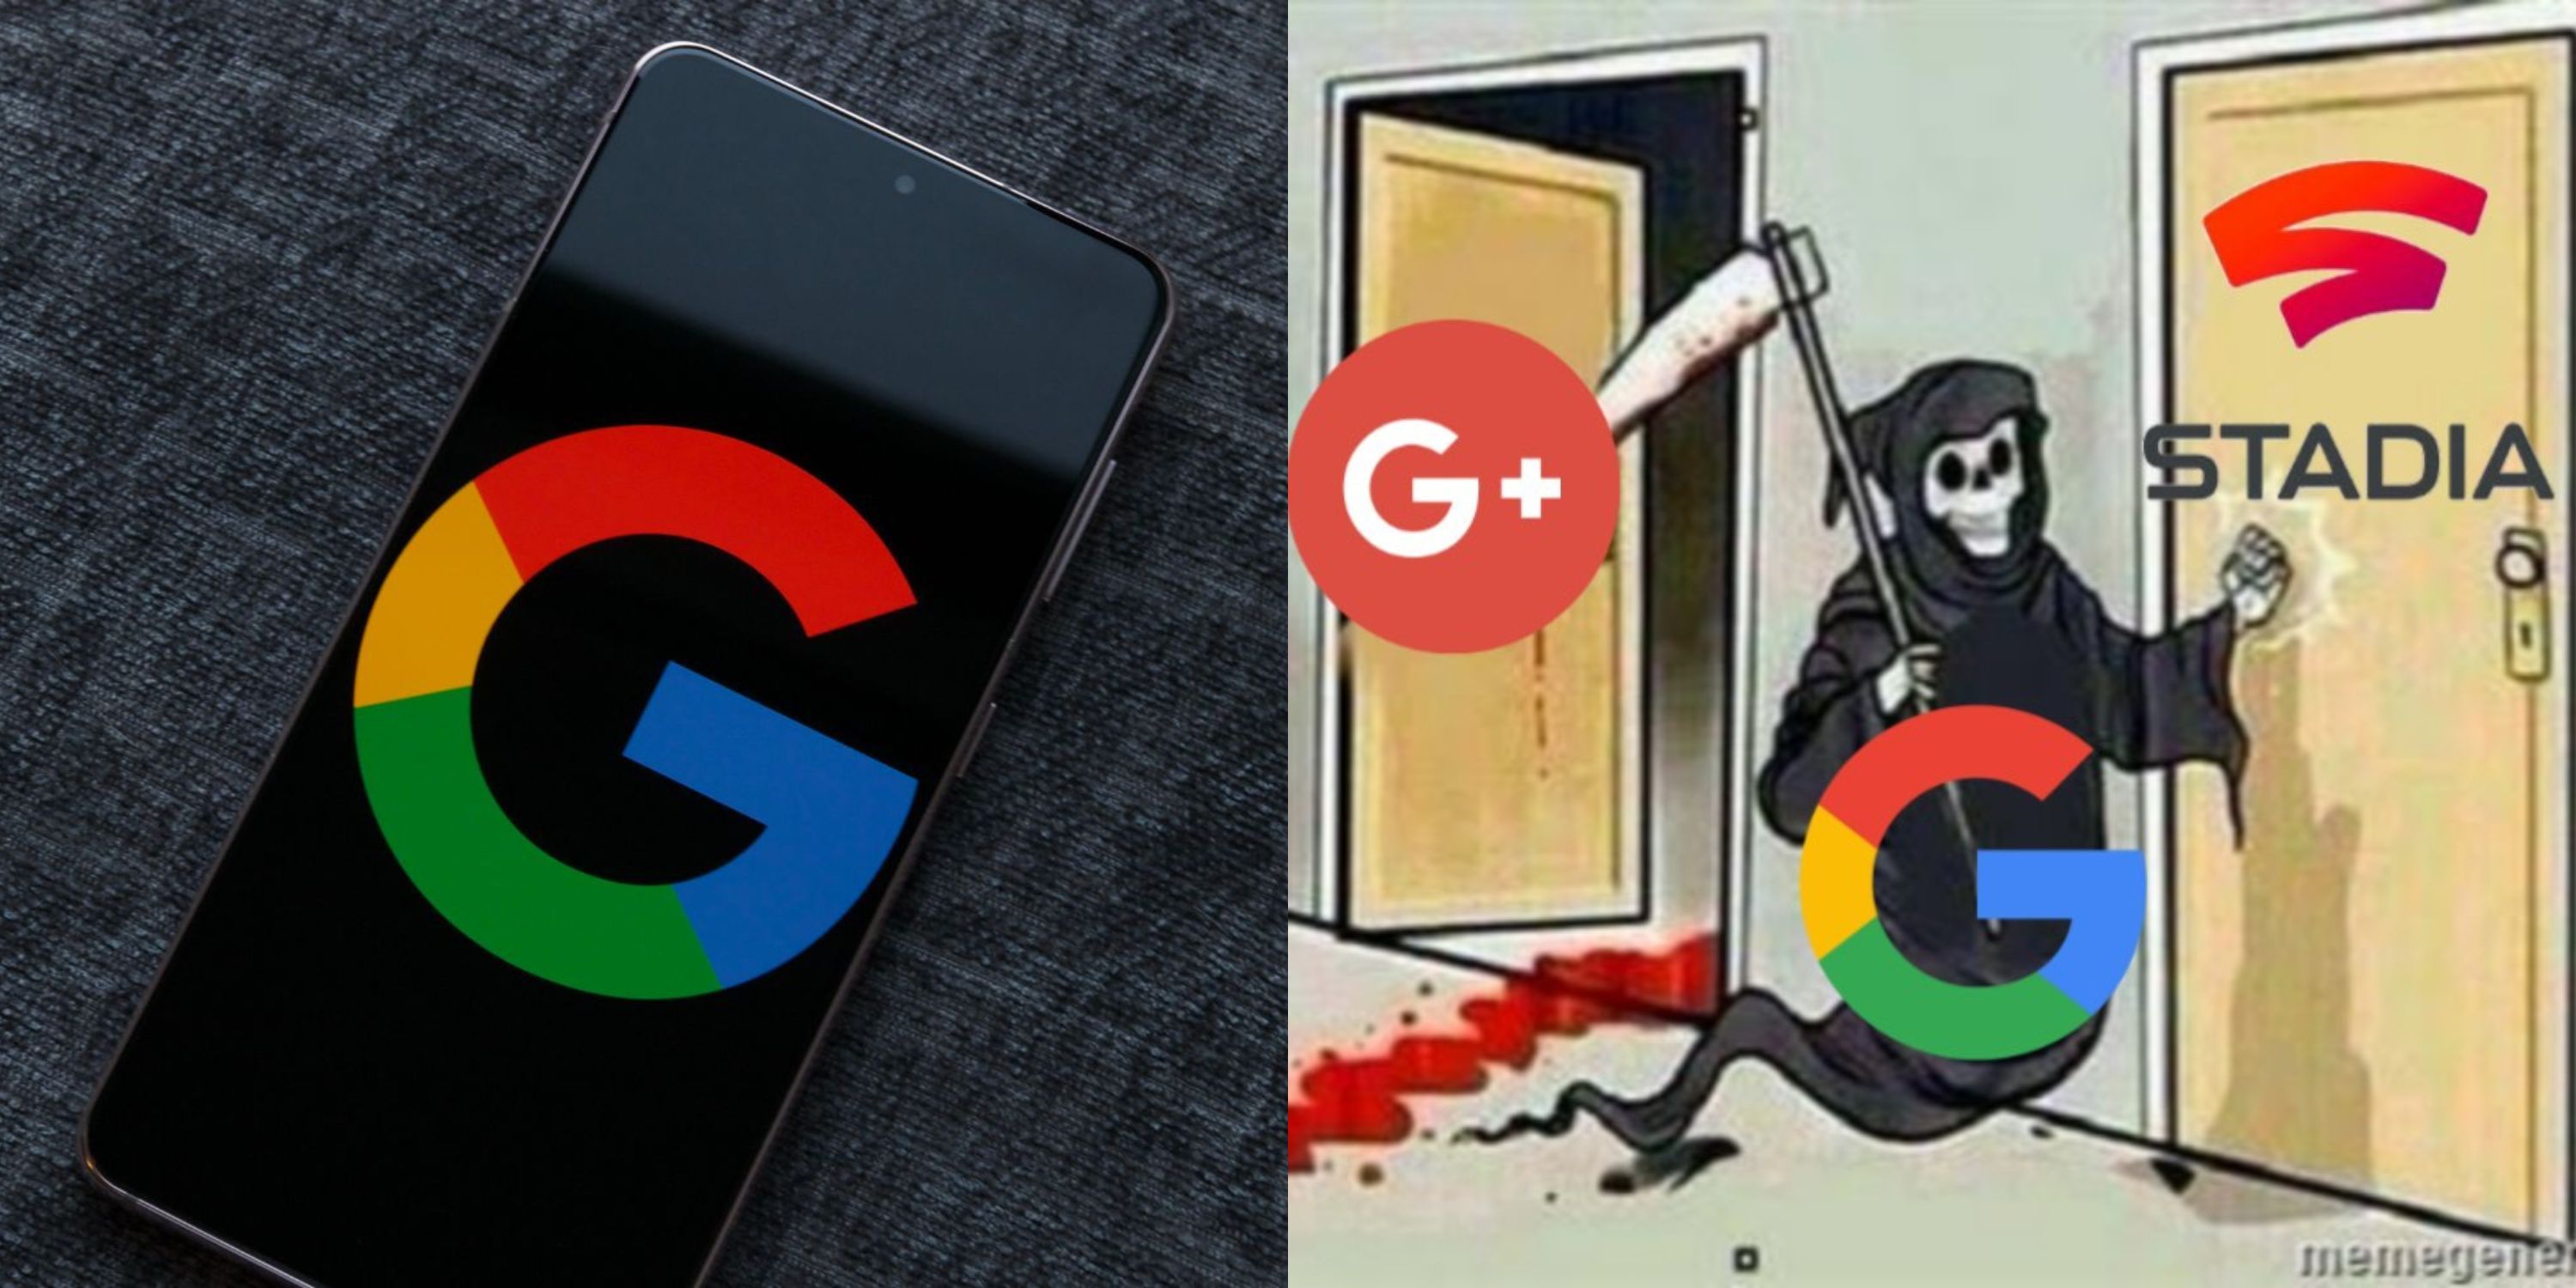 Featured-image-split-the-Google-logo-on-a-Pixel-phone-and-a-meme-about-the-end-of-Google-Stadia.jpg